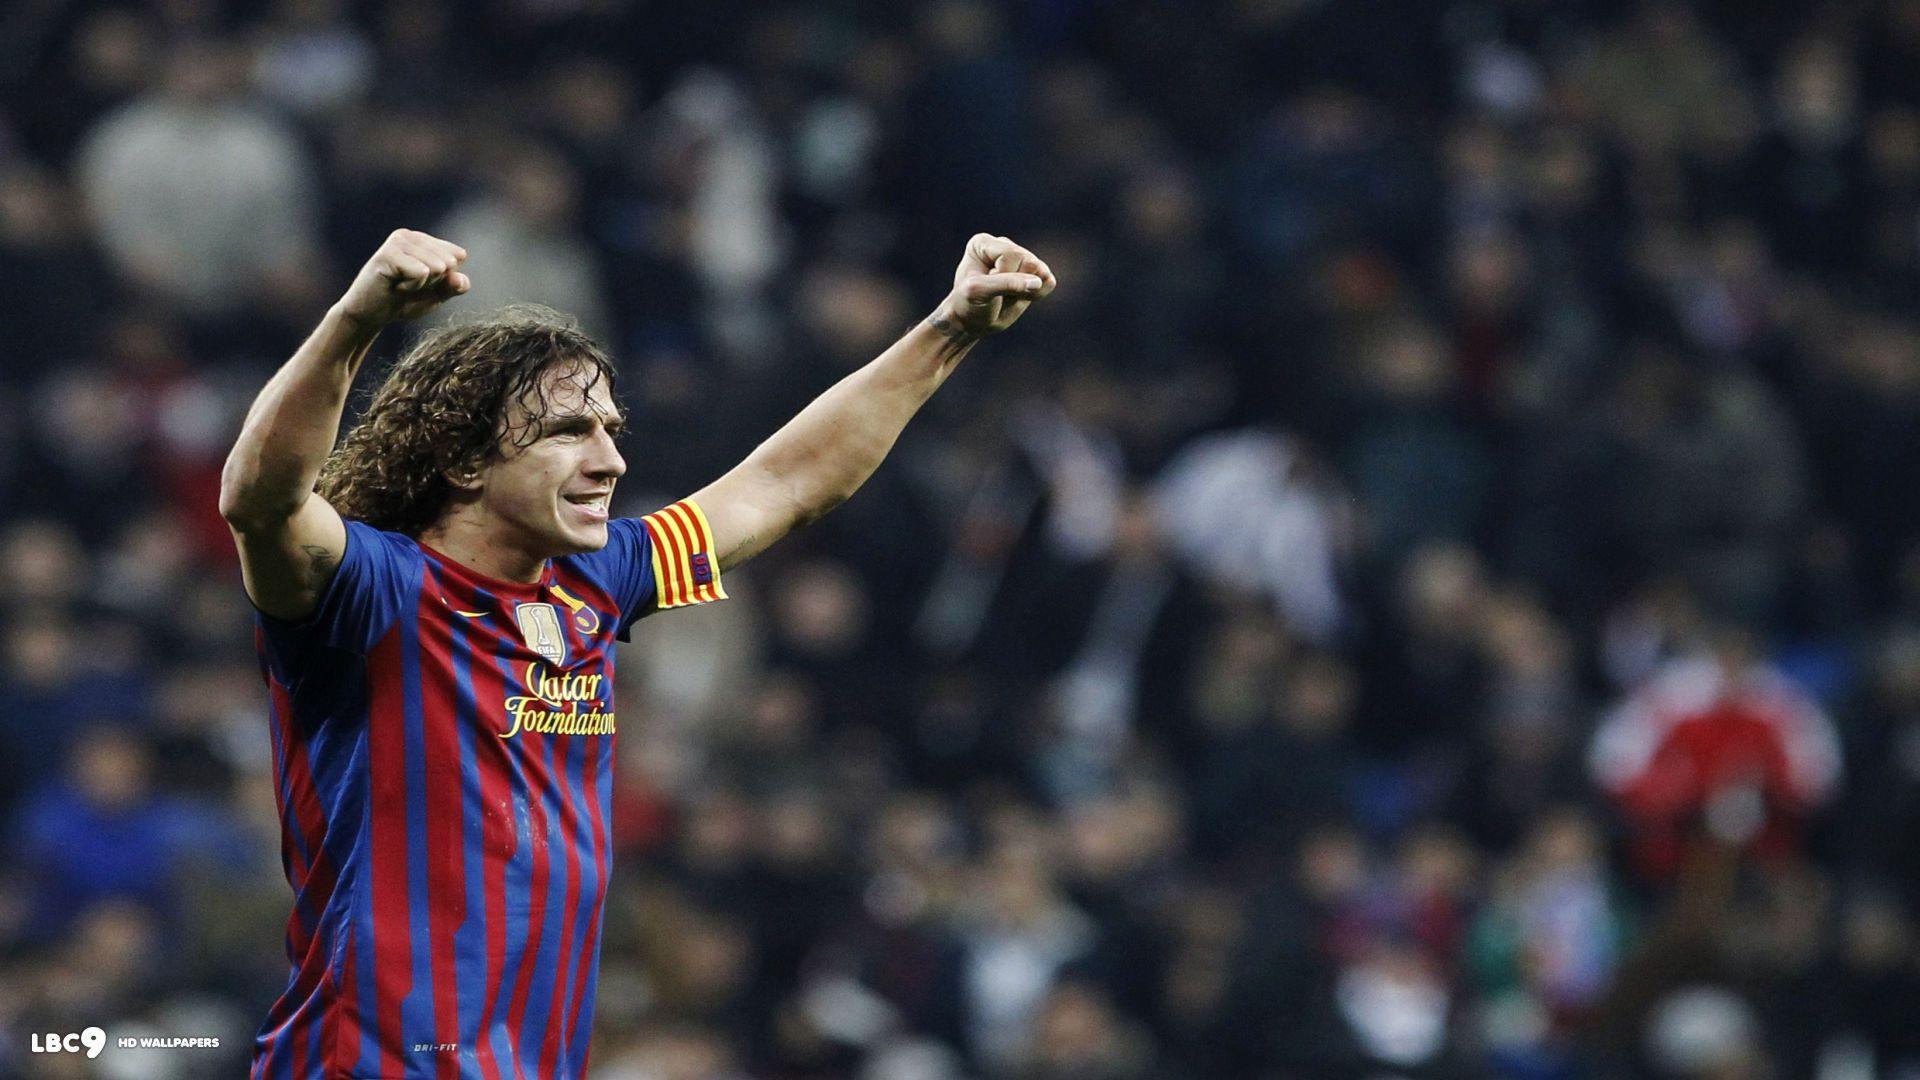 Carles Puyol Wallpaper 2 3. Players HD Background